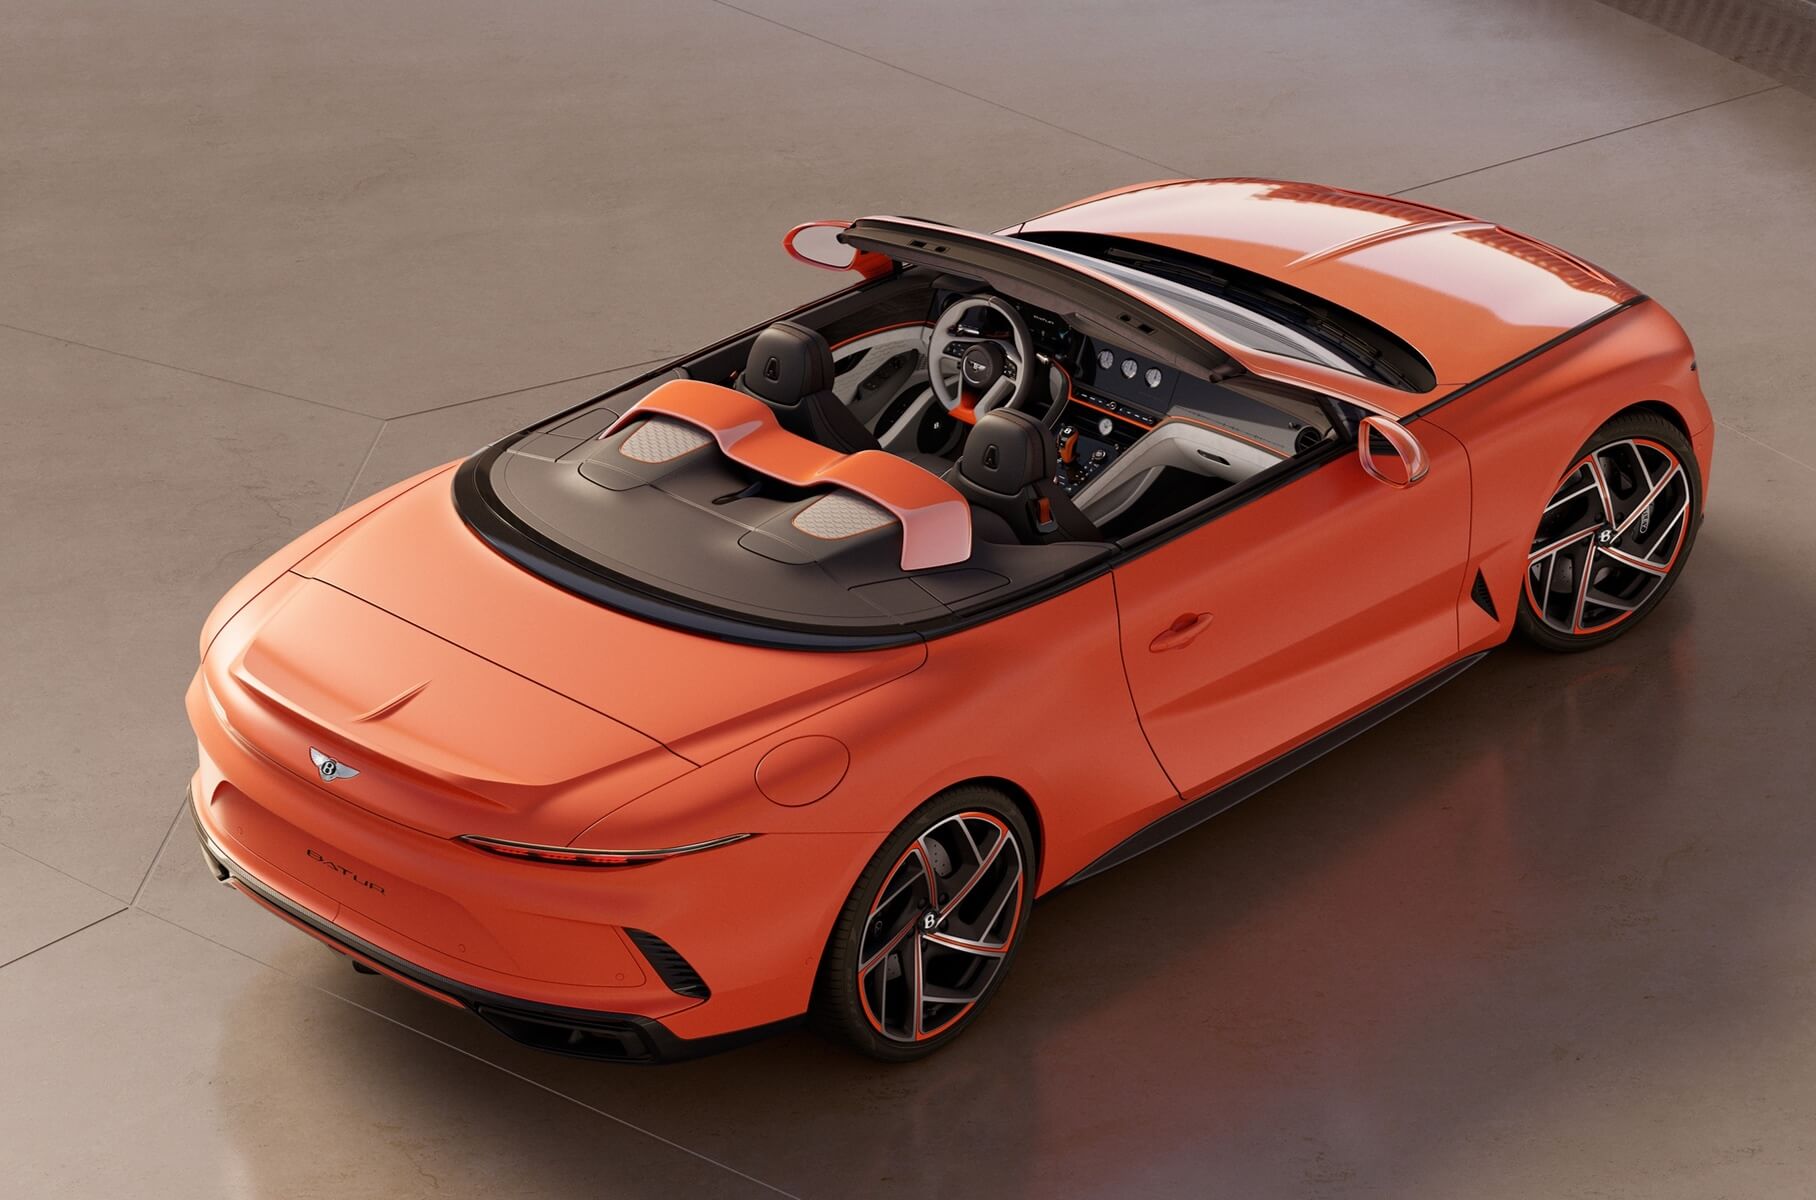 Bentley introduced the limited-edition Batur Convertible roadster